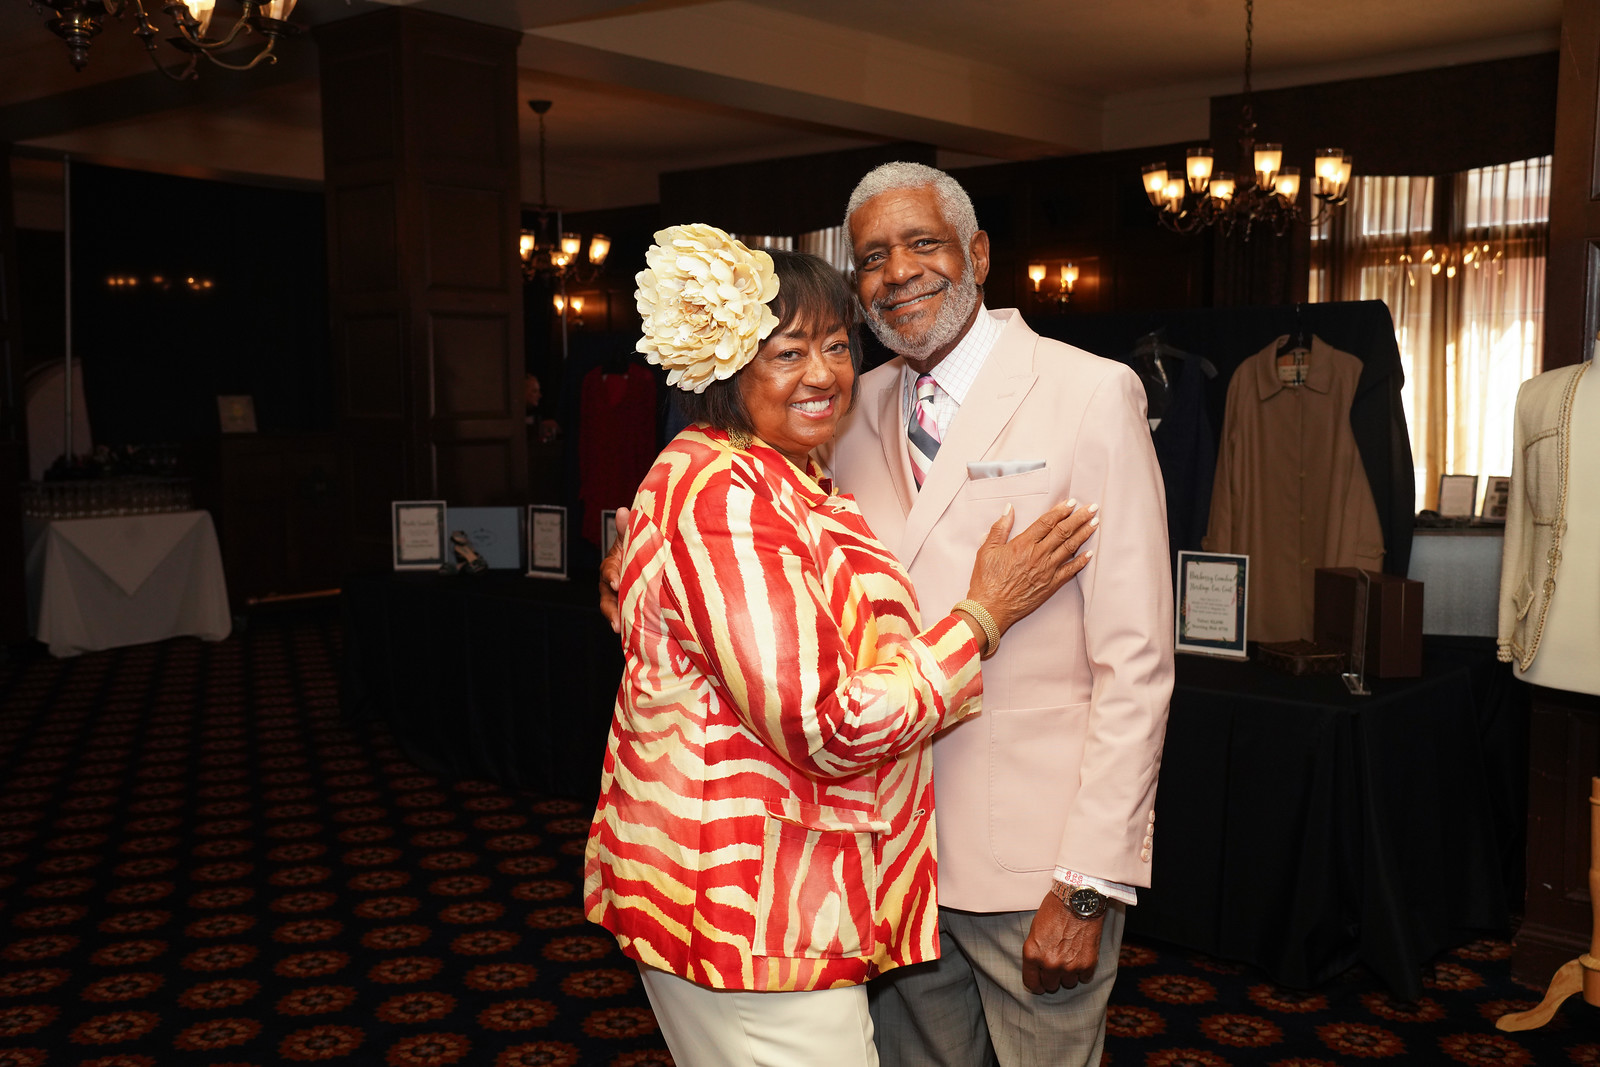 Event Tri-Chair Bonnie Gipson and her husband, George Gipson